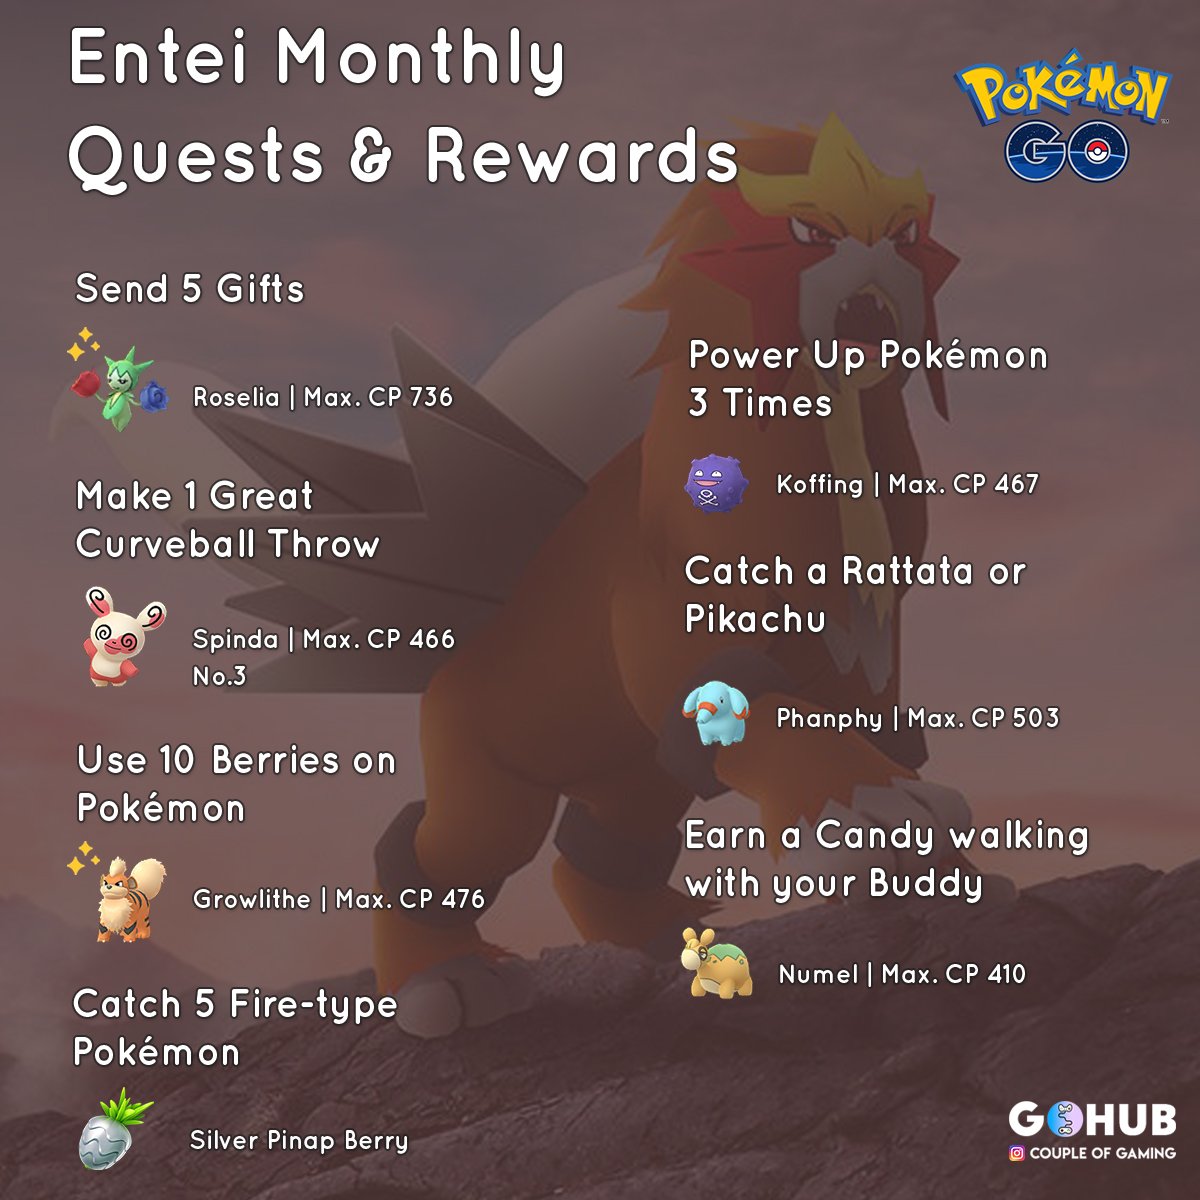 September Field Research Quests (Entei, September 2018 edition